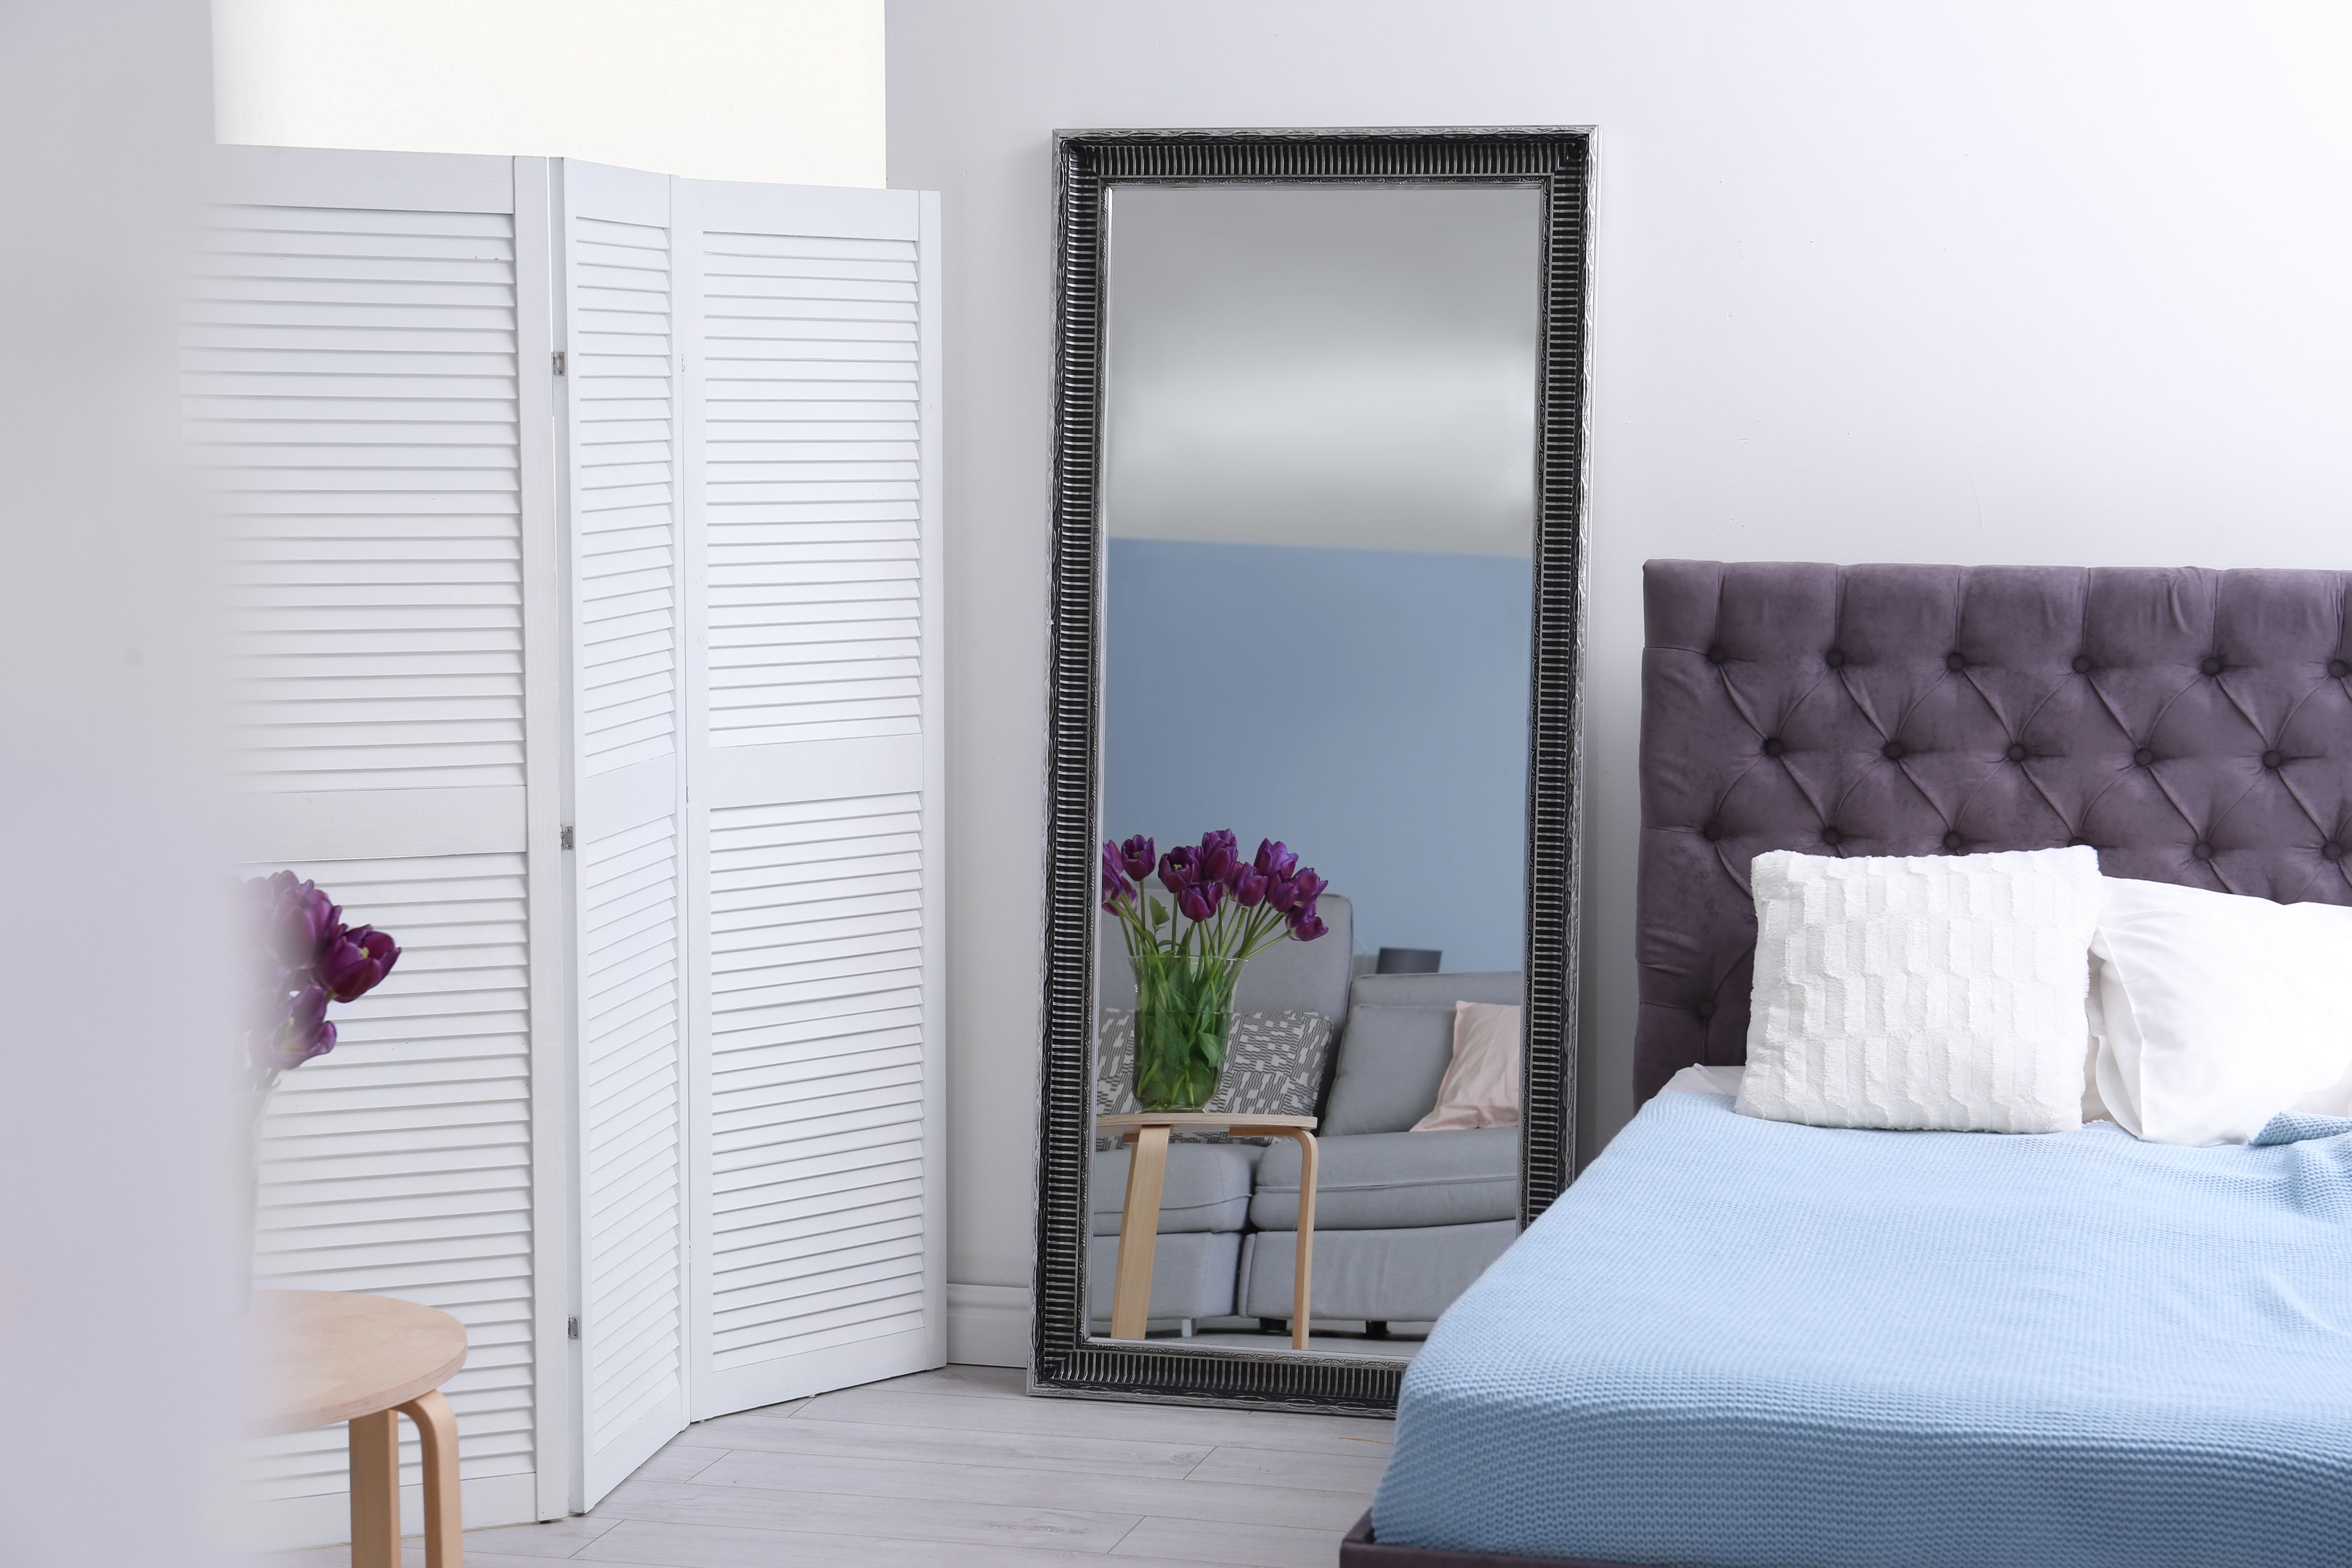 White Bedroom Mirror: A Reflection Of Elegance